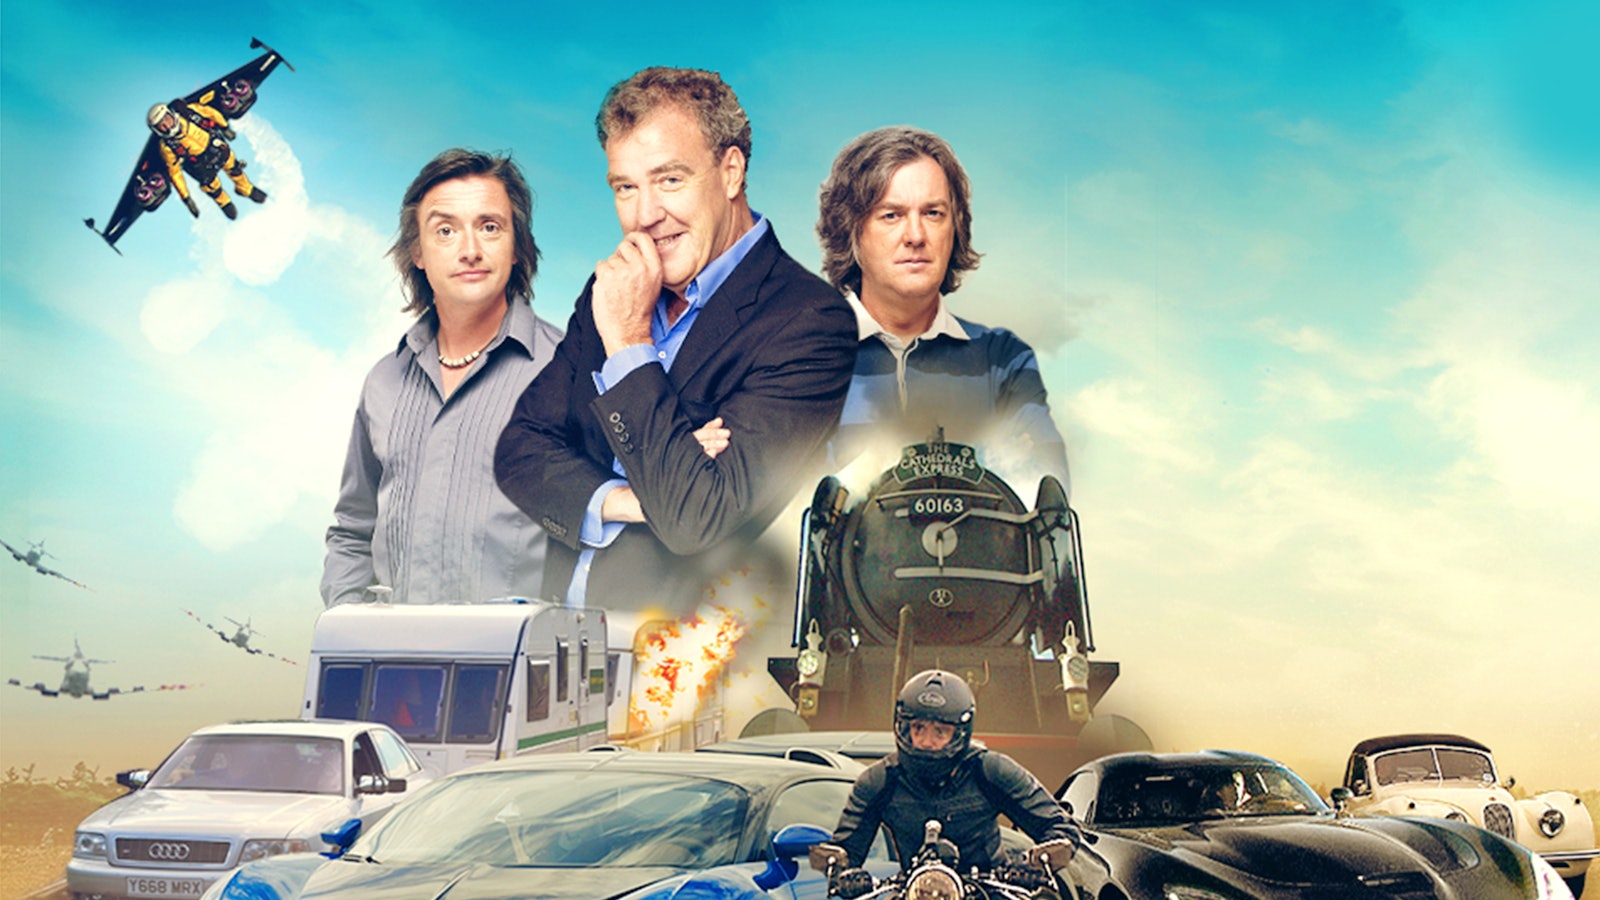 Top Gear: Planes, Trains and Automobiles - Watch Free on Pluto TV Canada